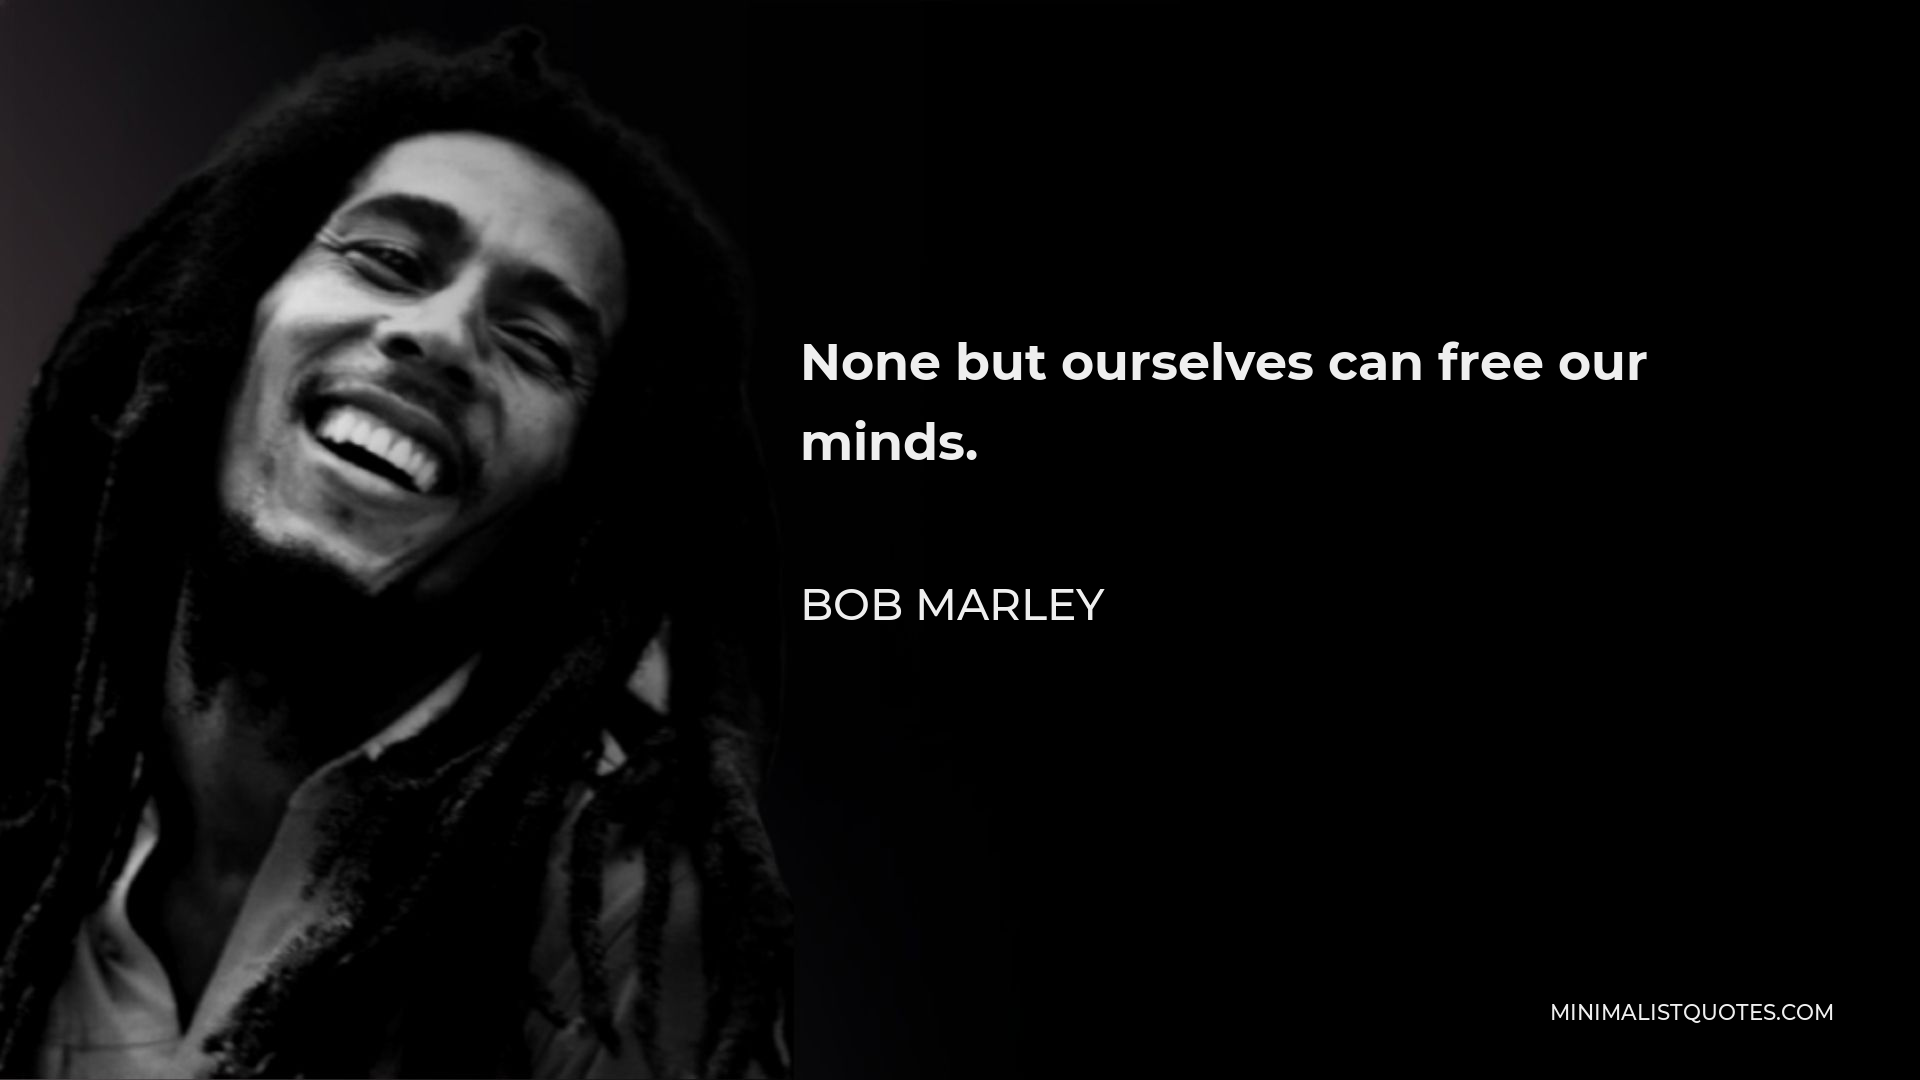 Bob Marley Quote - None but ourselves can free our minds.